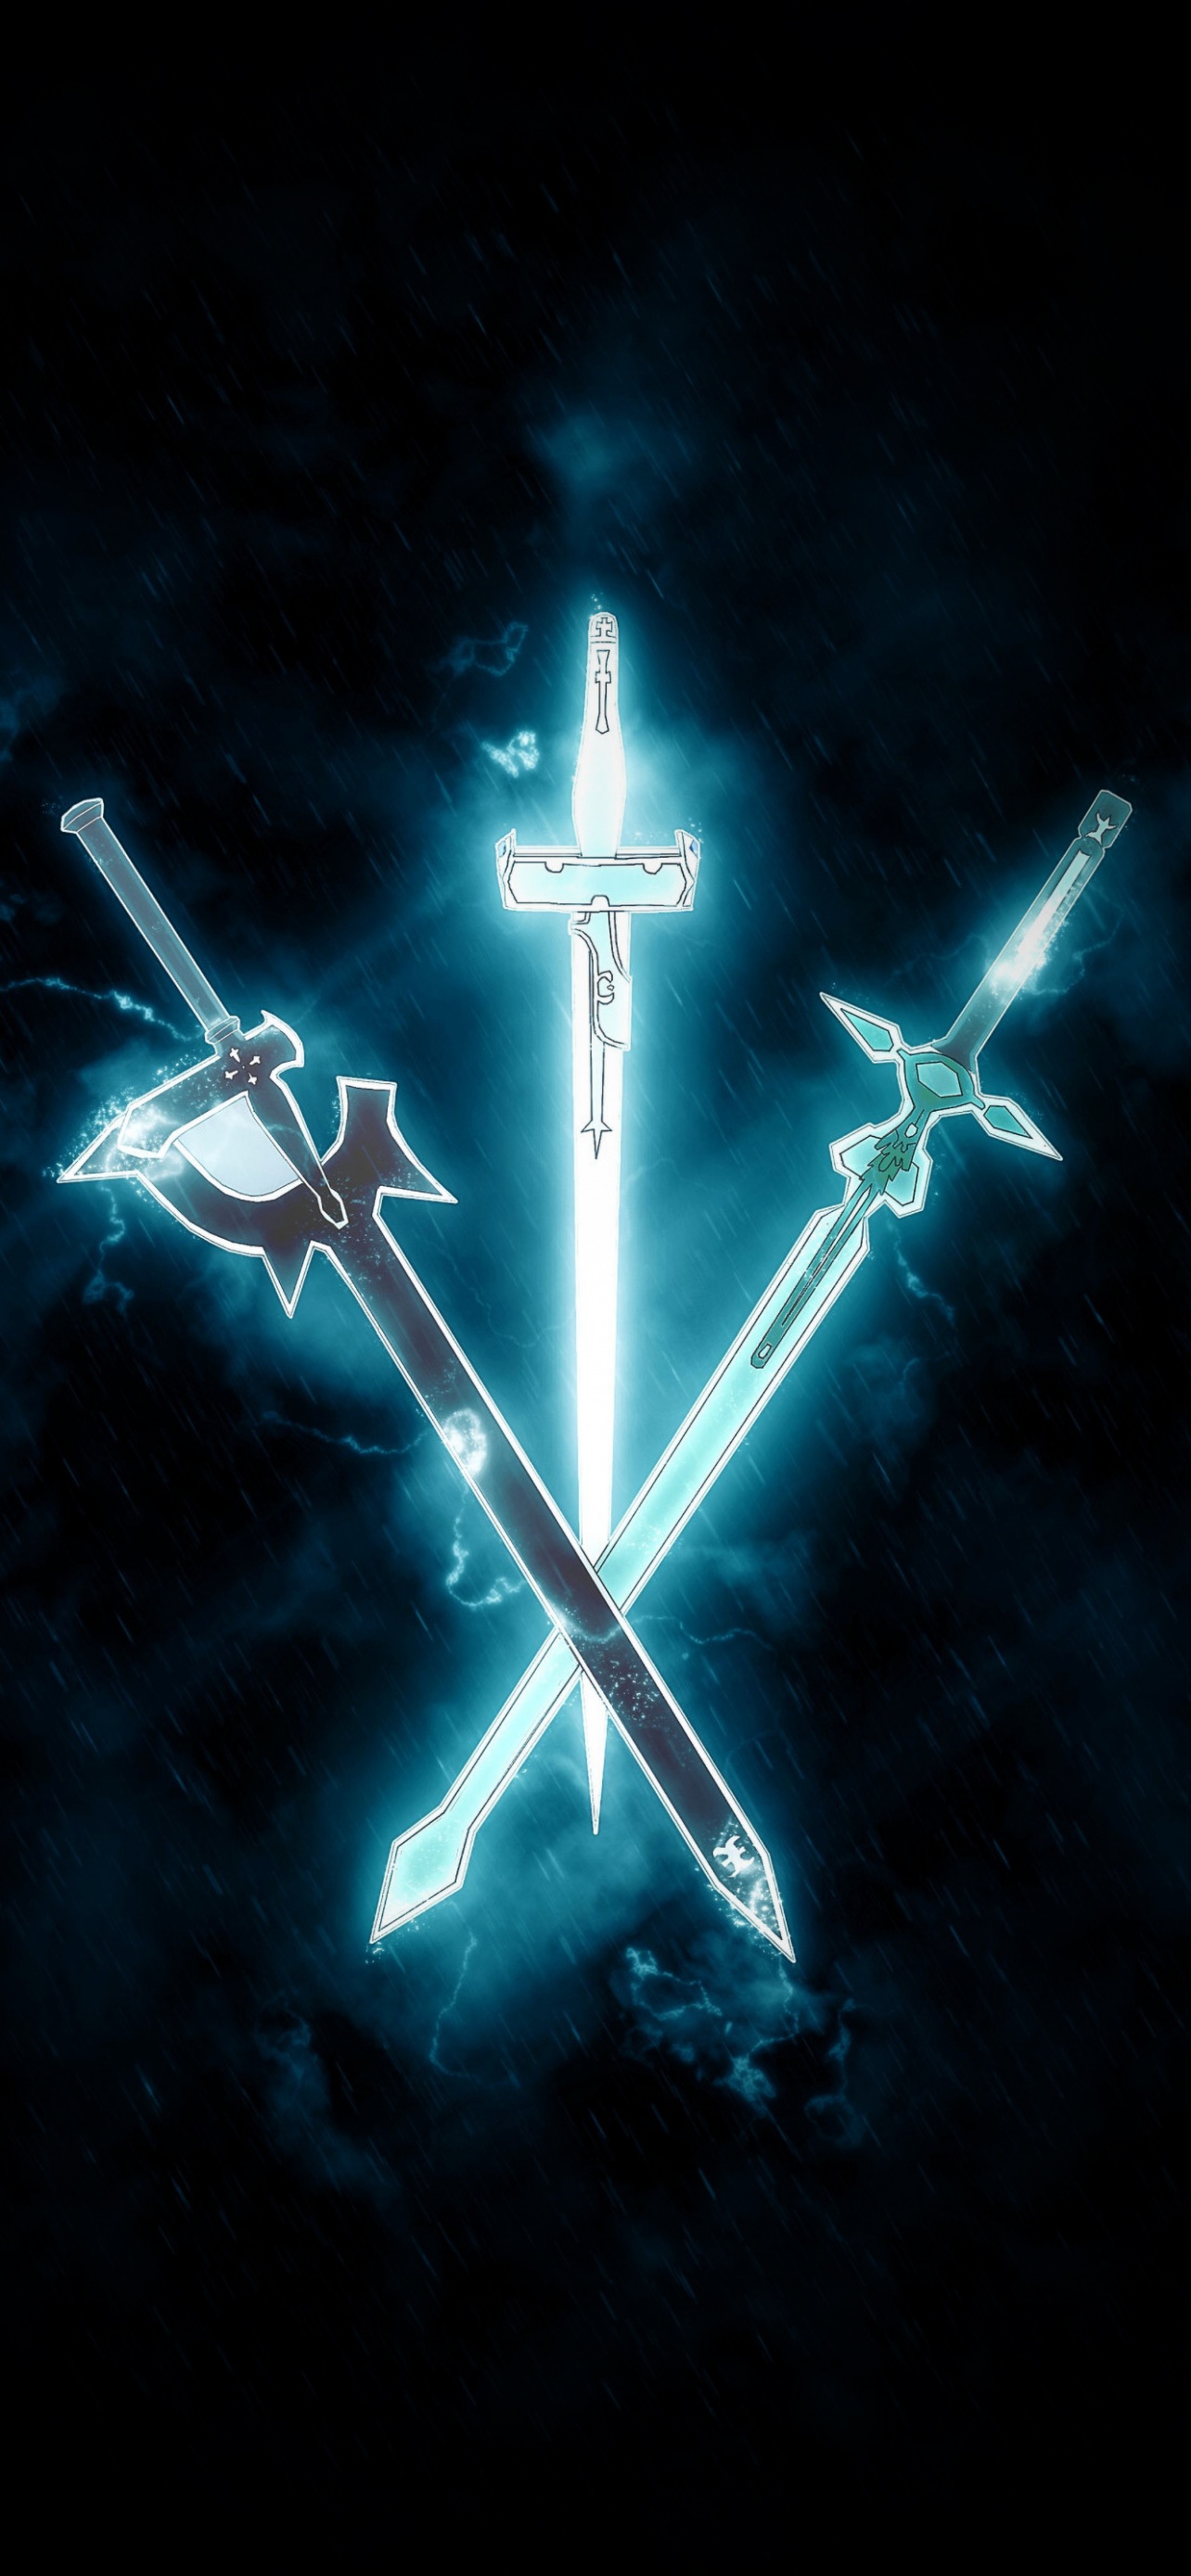 13 Sword Art Online Wallpapers iPhone Android and Desktop  The RamenSwag